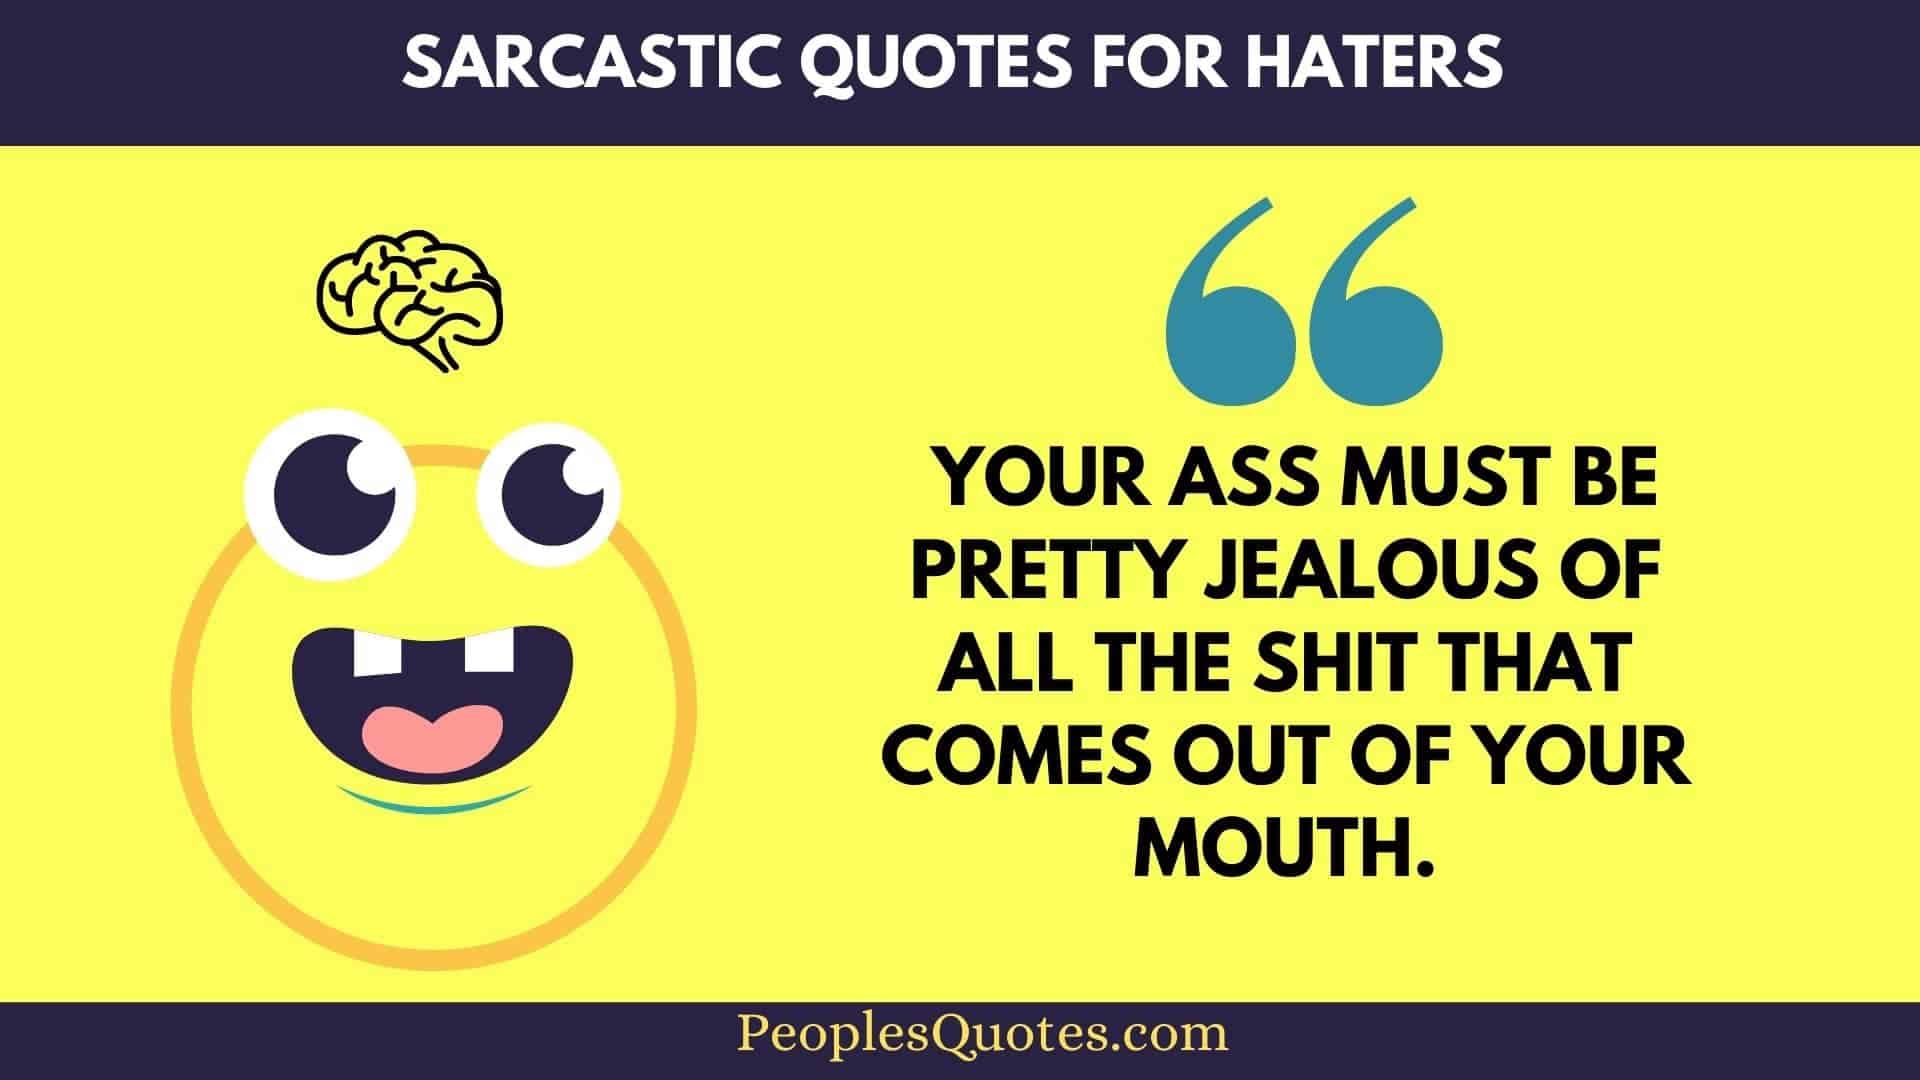 Sarcastic Quotes For Haters